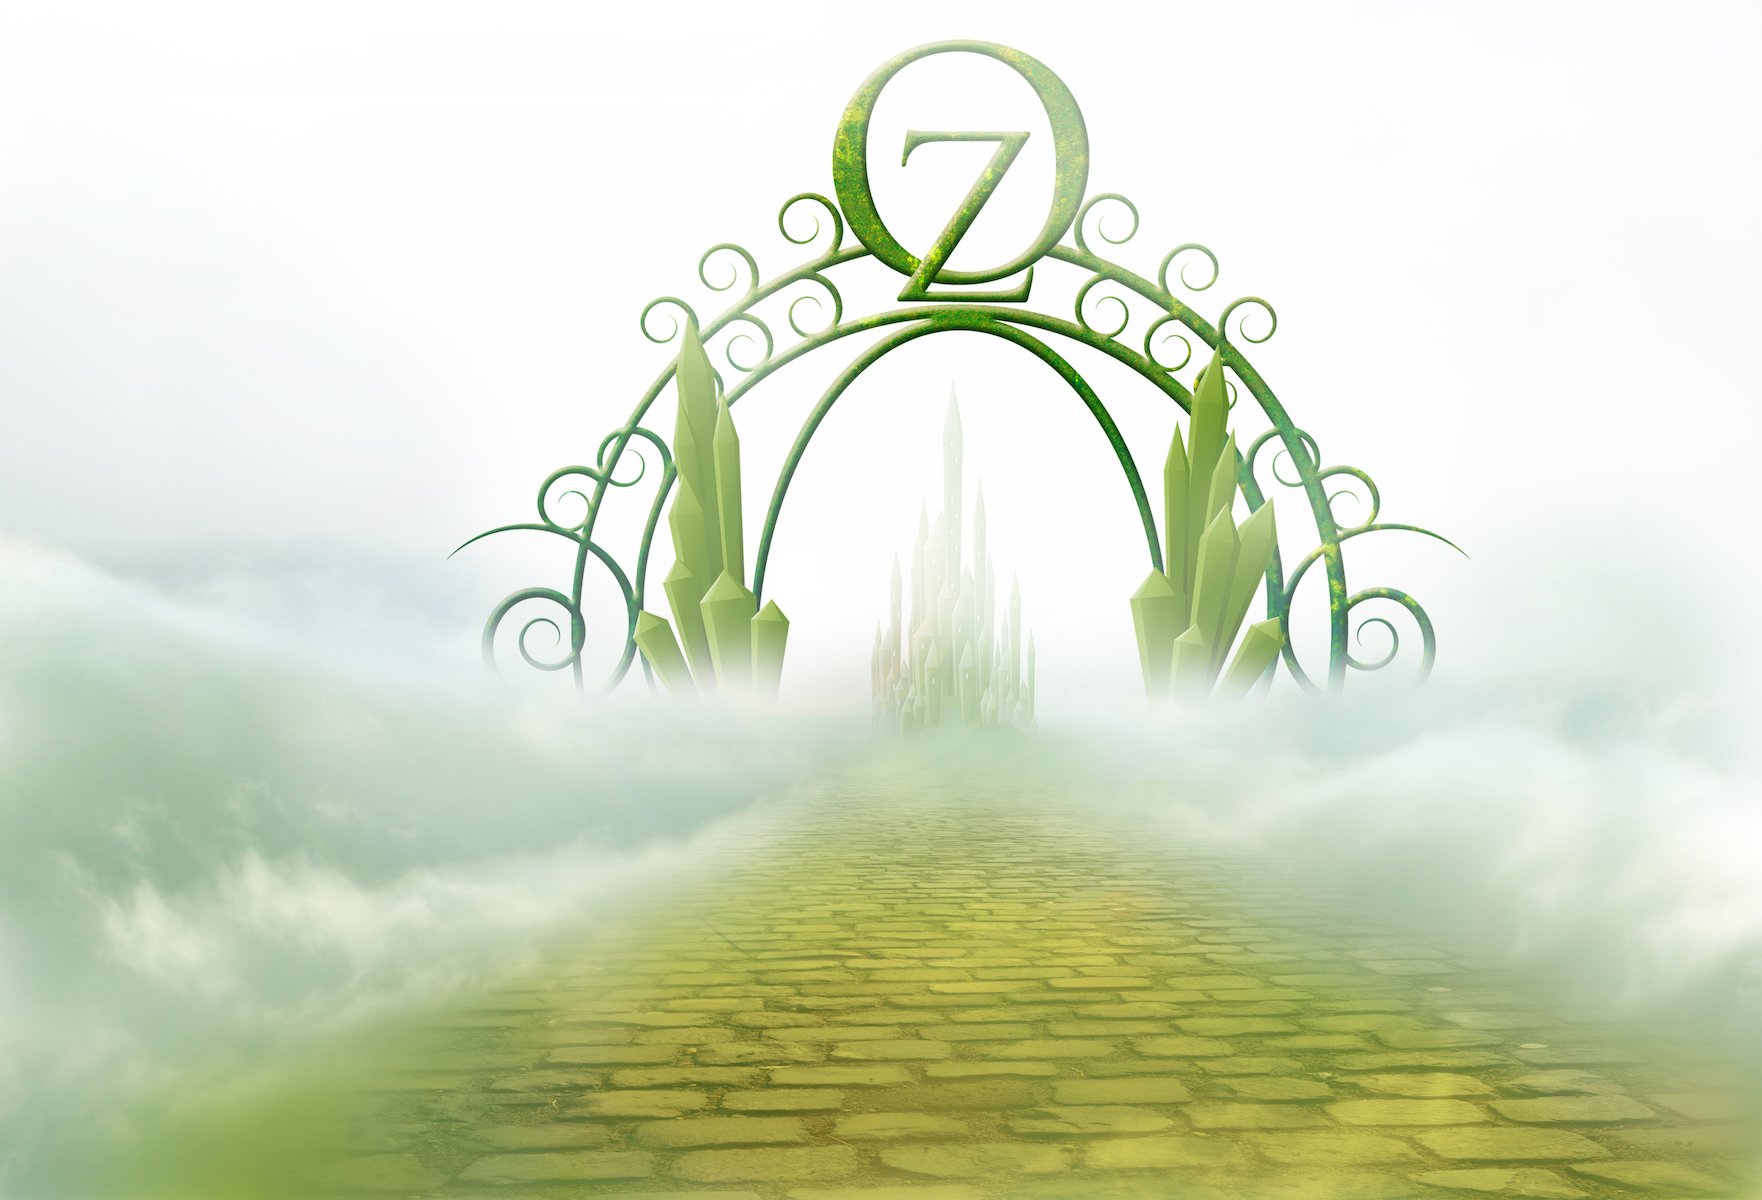 gates of oz from wizard of oz